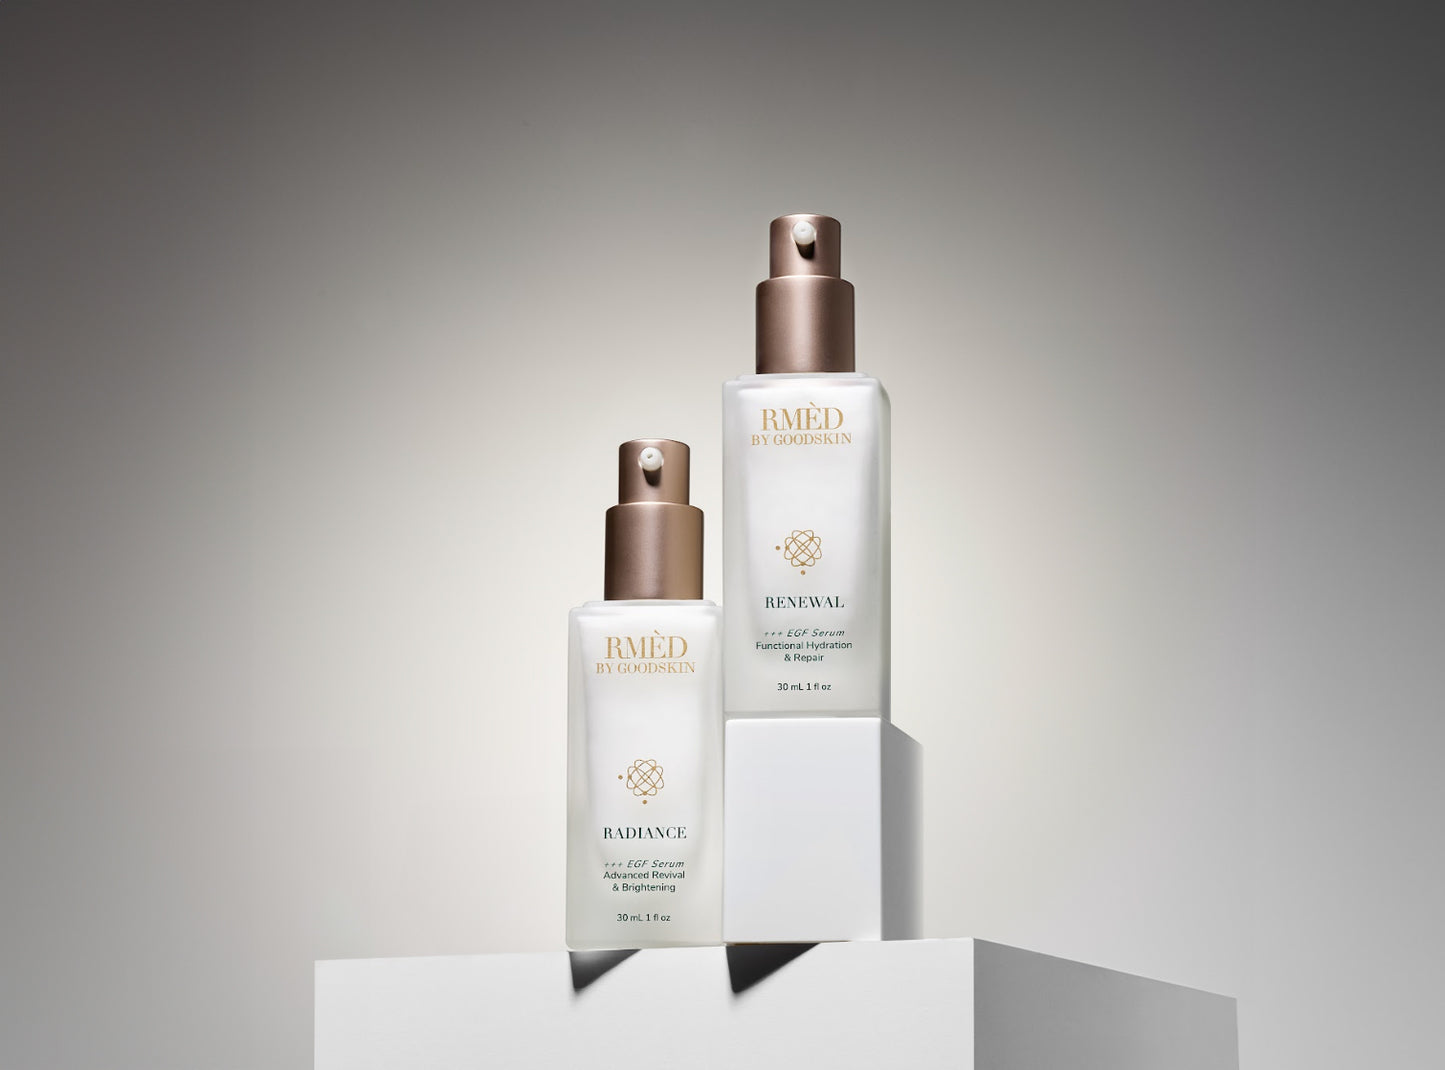 Epidermal Growth Factor Duo / RENEWAL and RADIANCE.